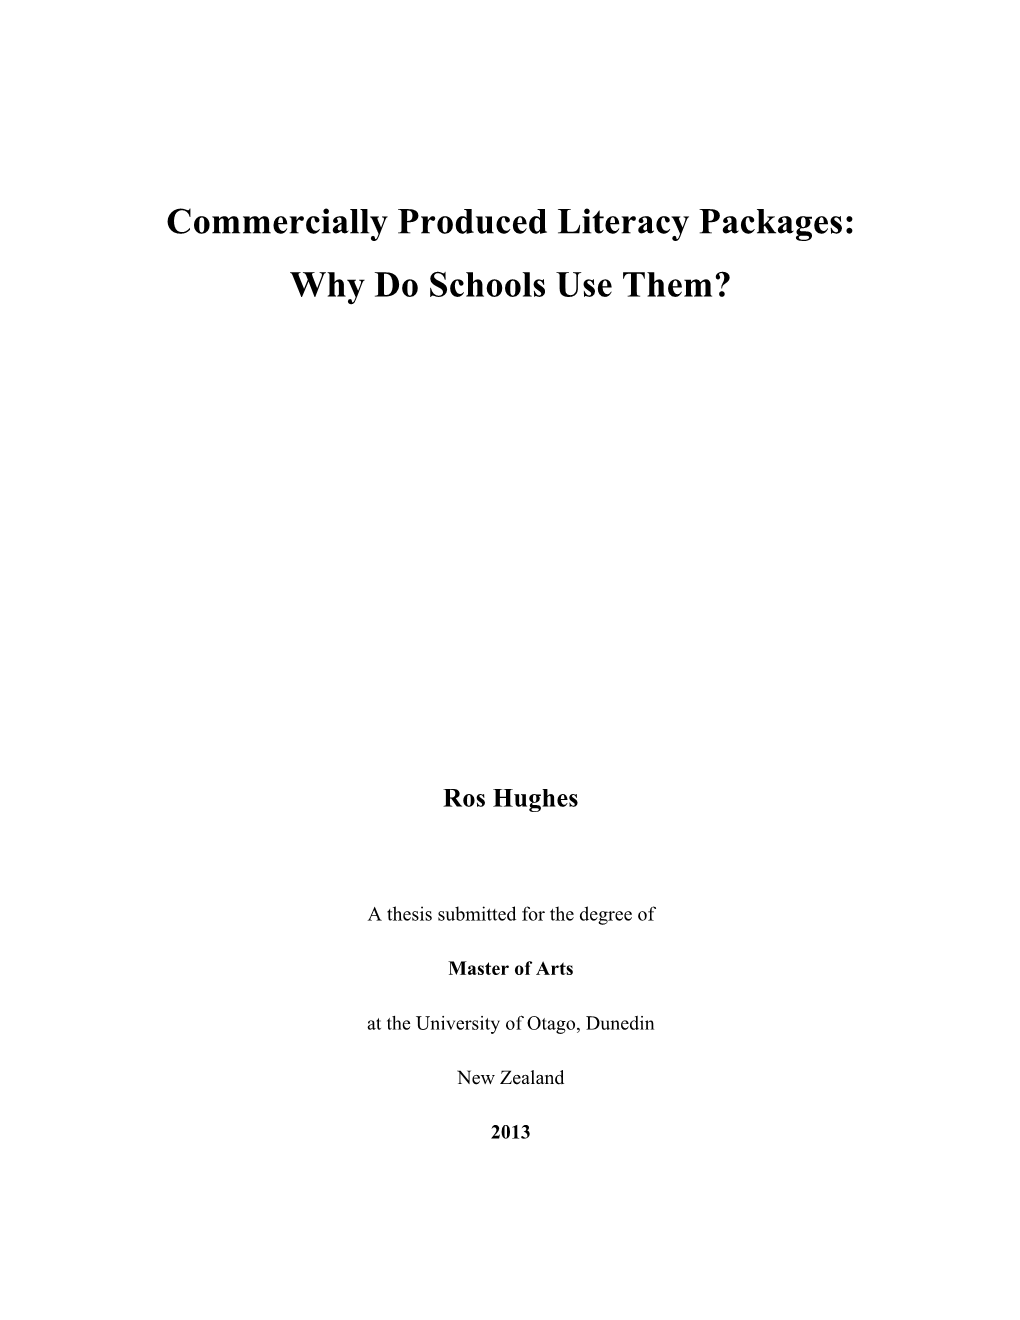 Commercially Produced Literacy Packages: Why Do Schools Use Them?